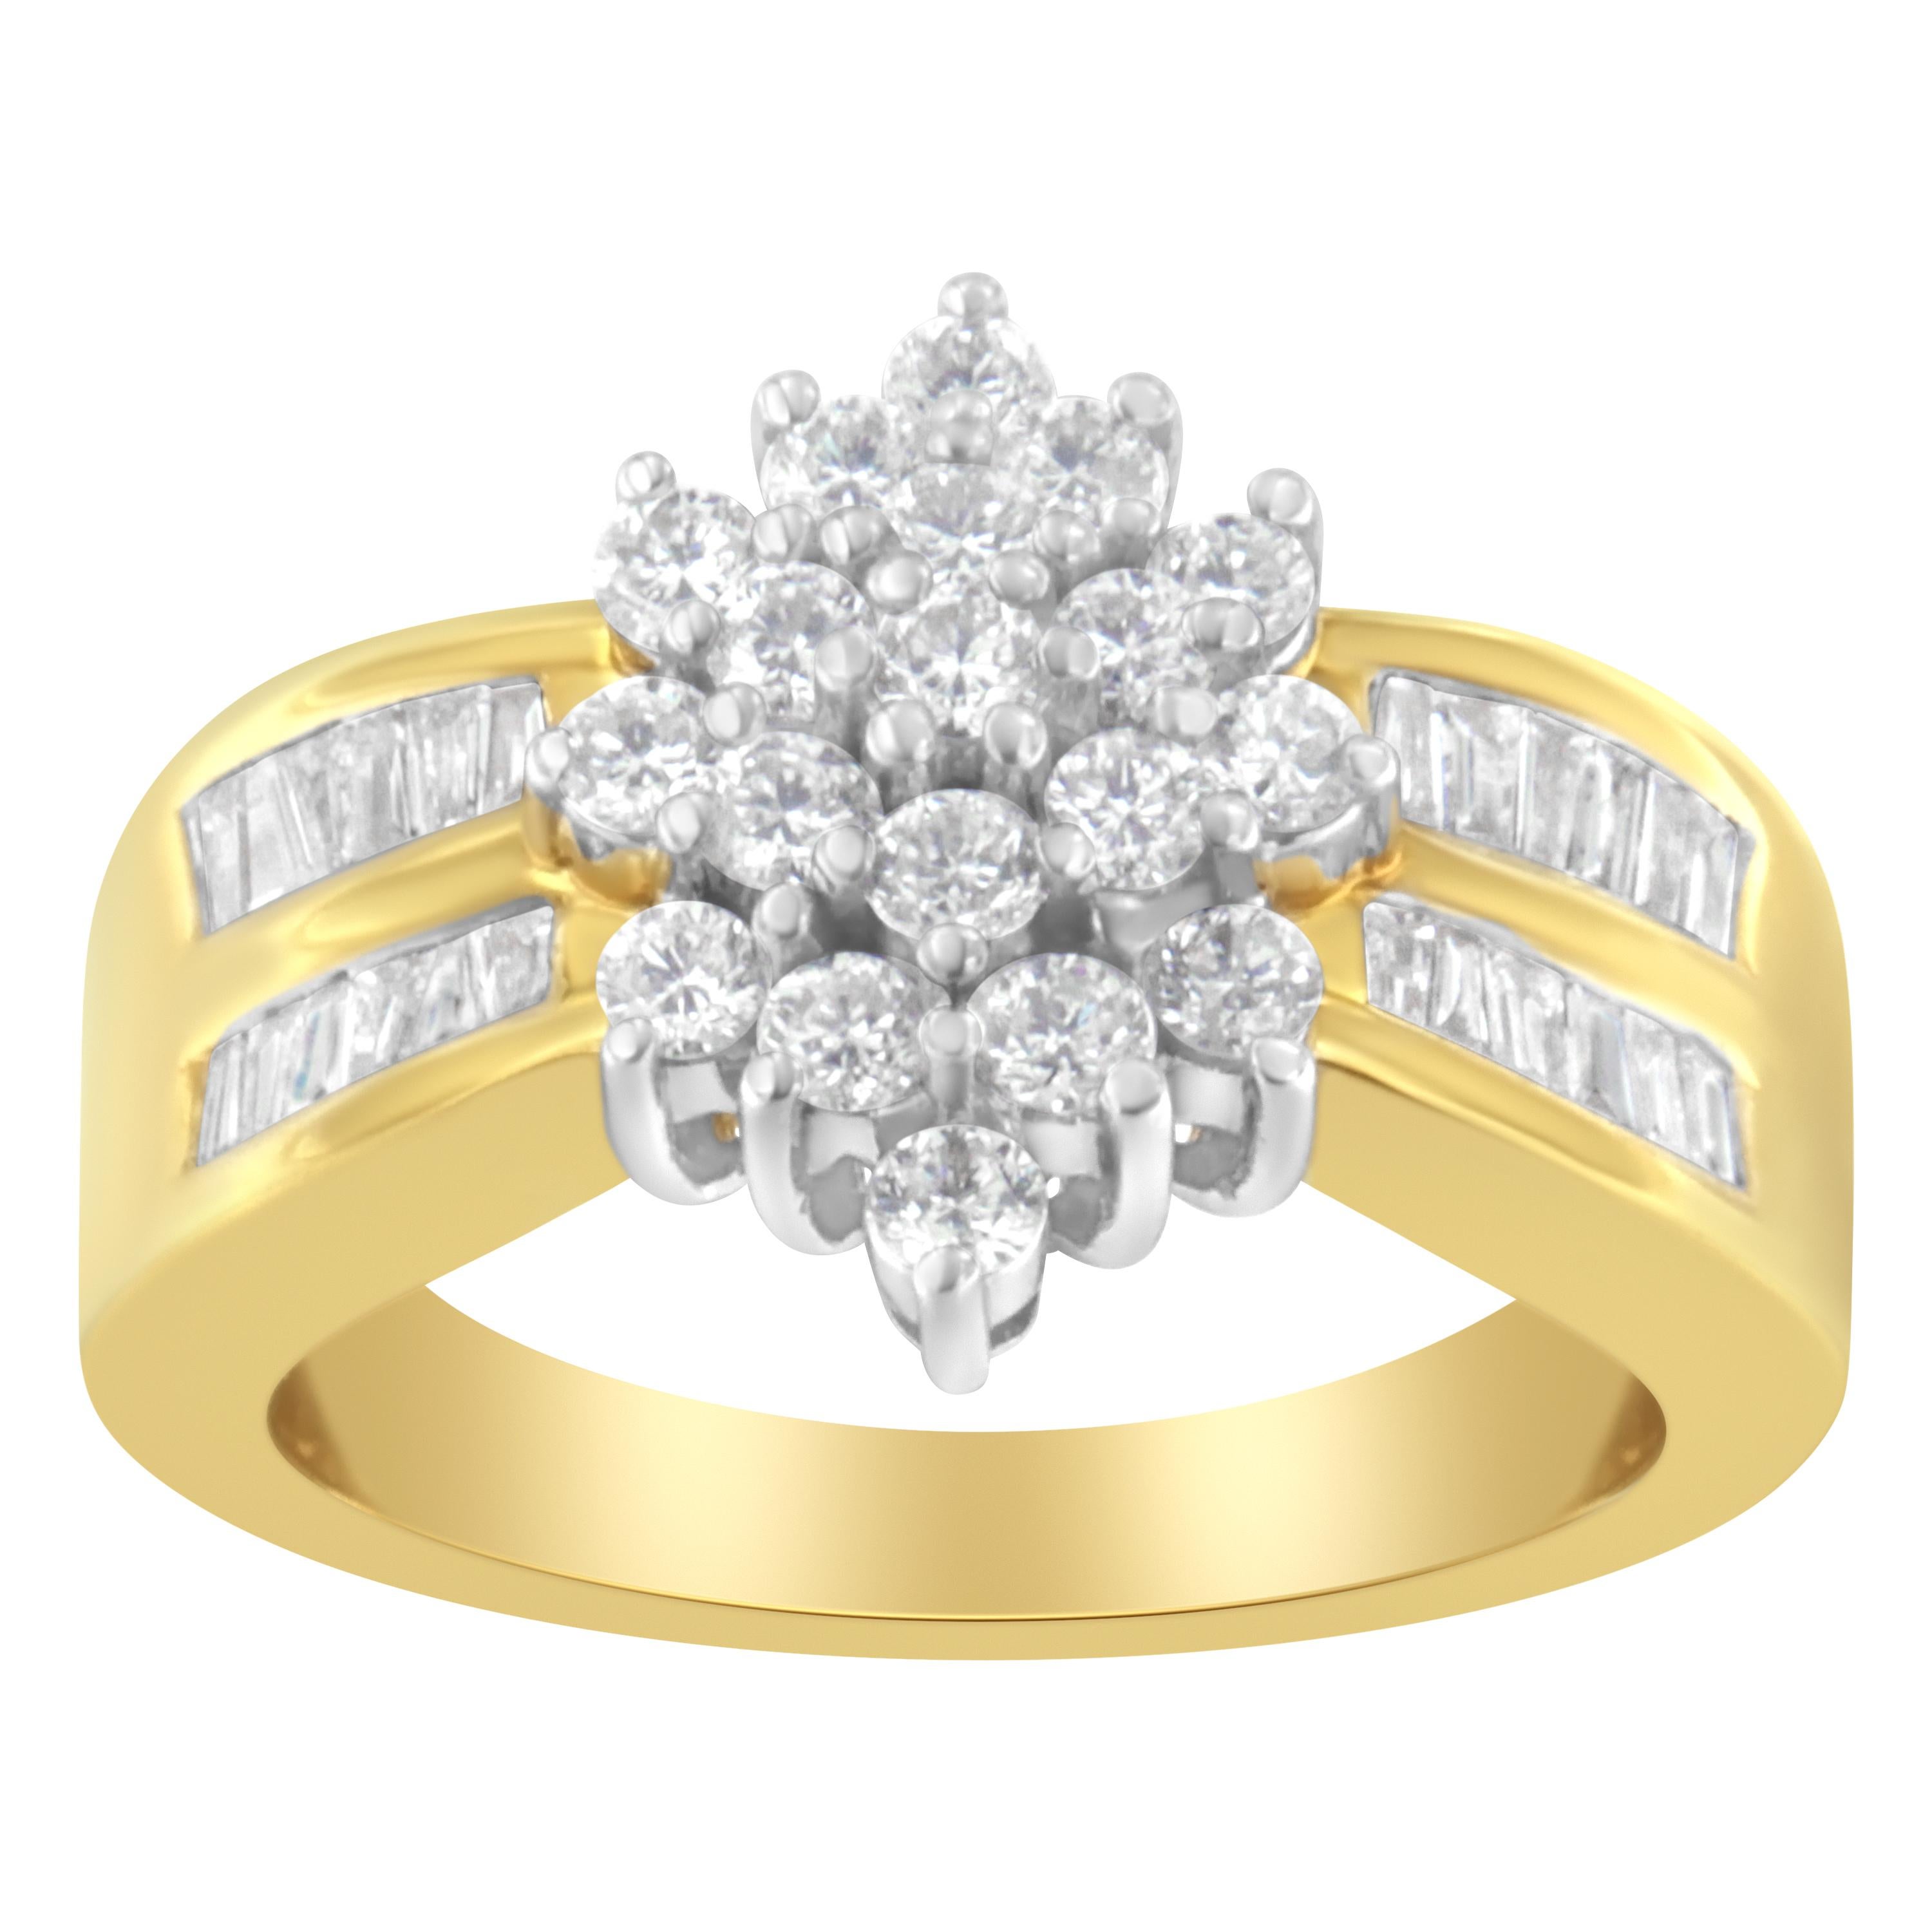 This stunning 10k yellow gold ring is designed with a beautiful flower inlaid with 3/4ct round cut diamonds. Over the band, on each side of the flower, two rows of channel set baguette cut diamonds frame it giving it a unique look. Product